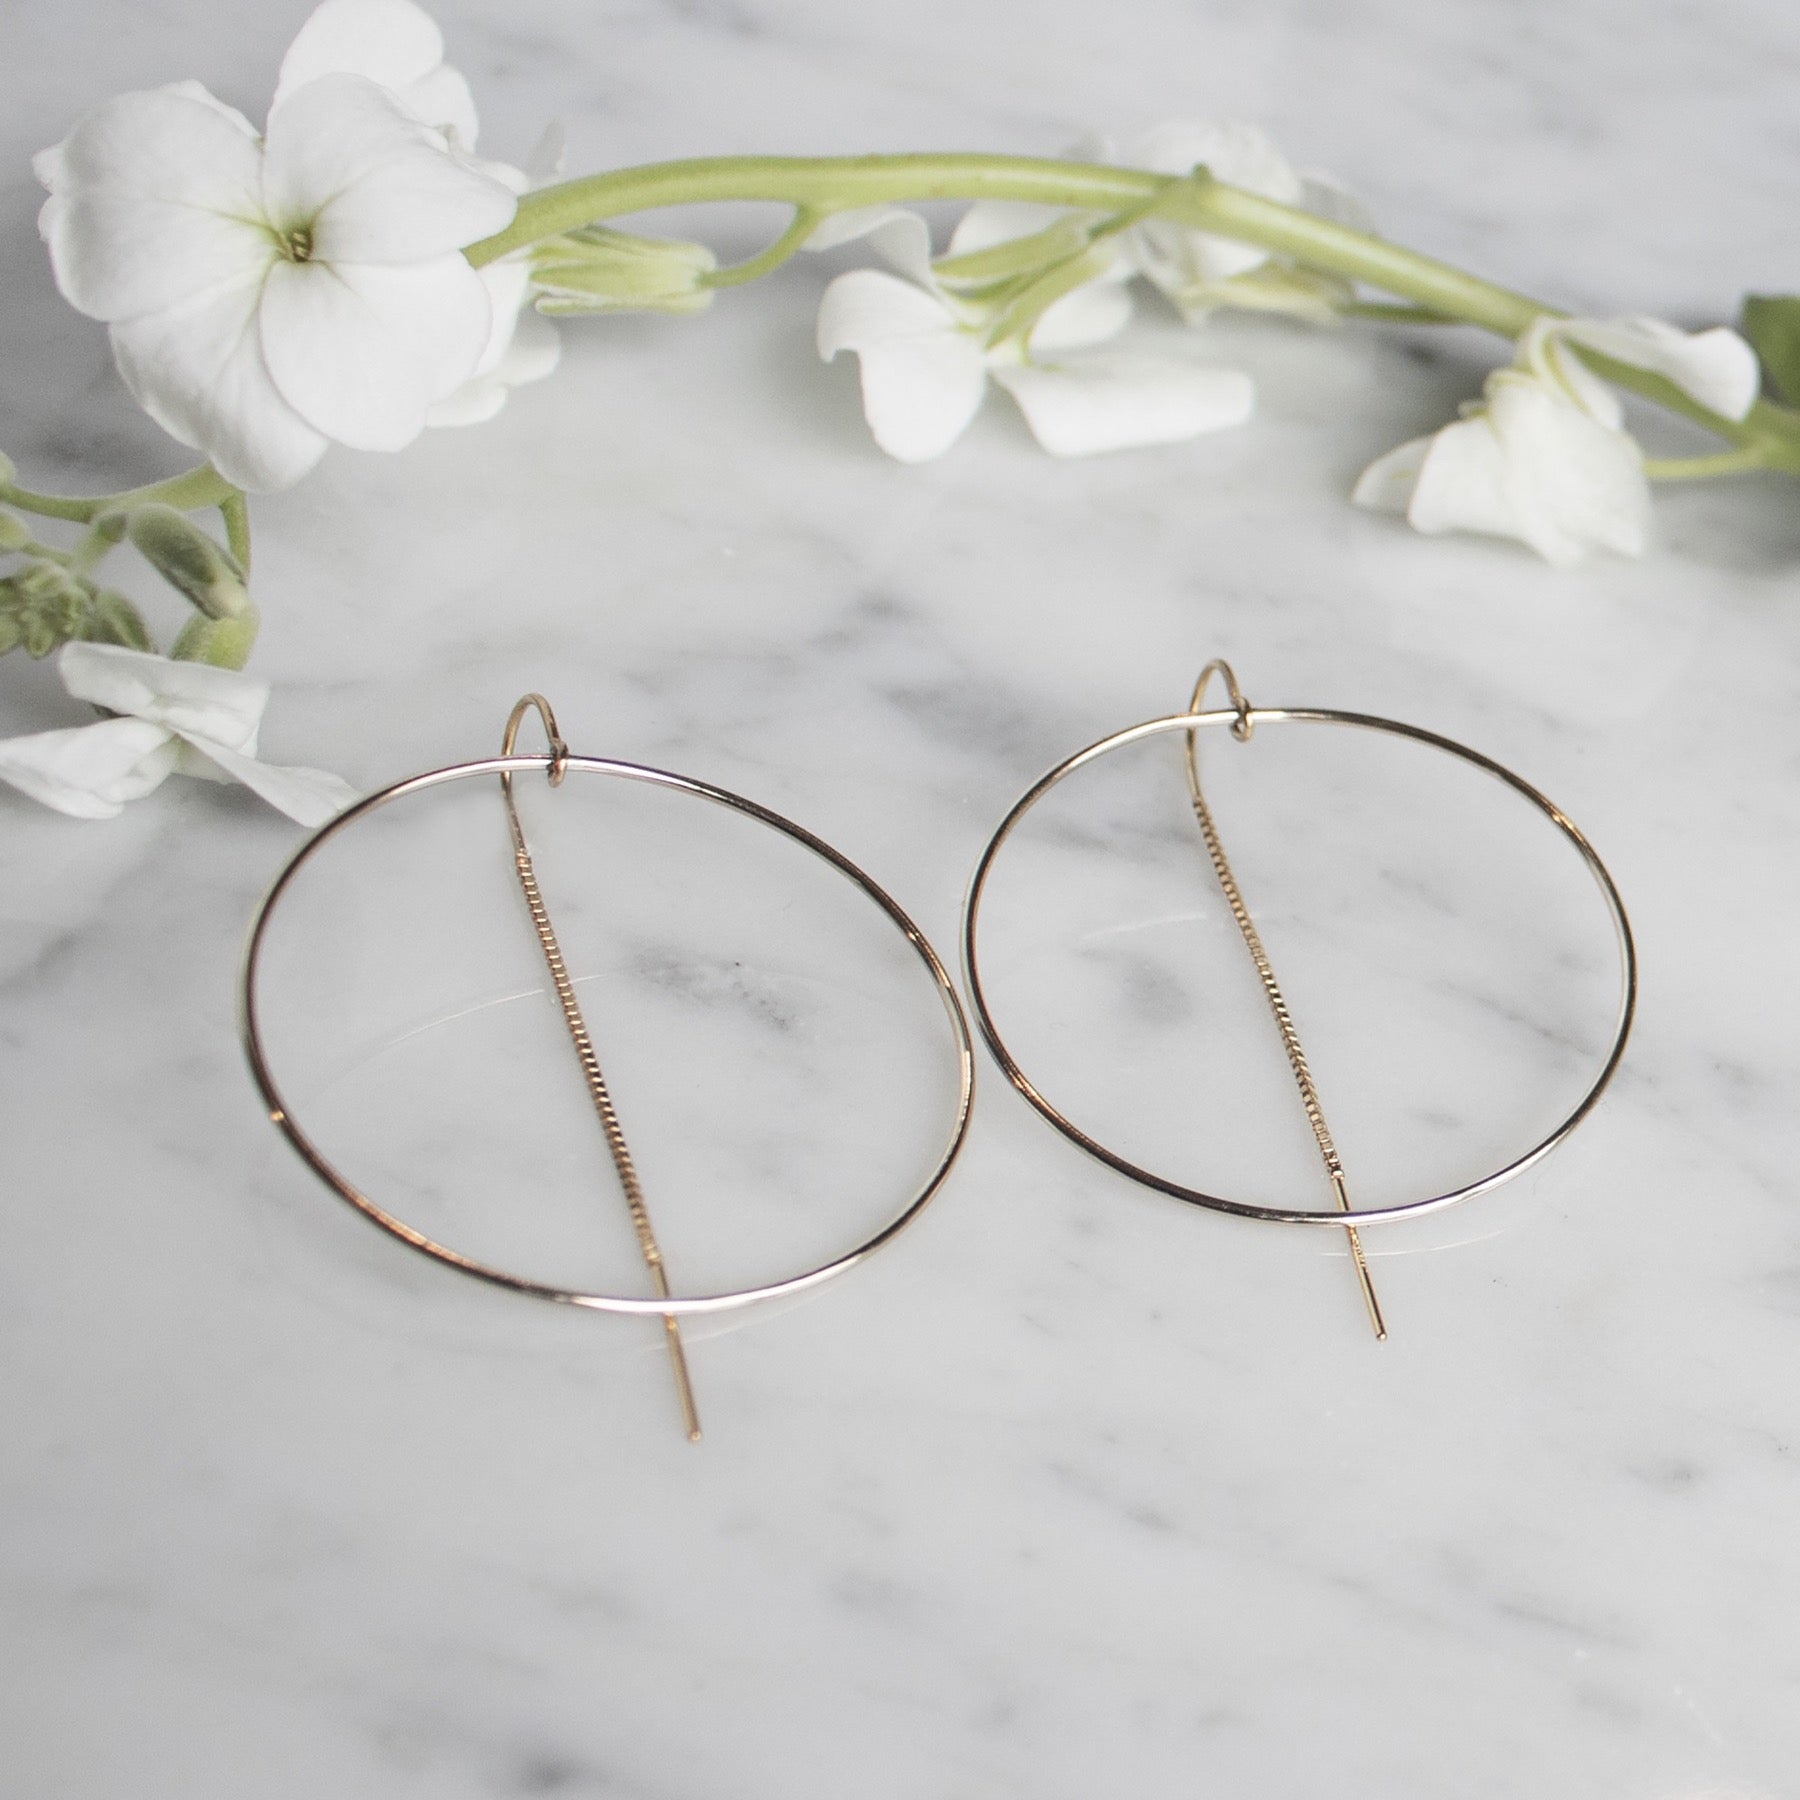 Gold Filled Threader Hoop Earrings - Camille Jewelry